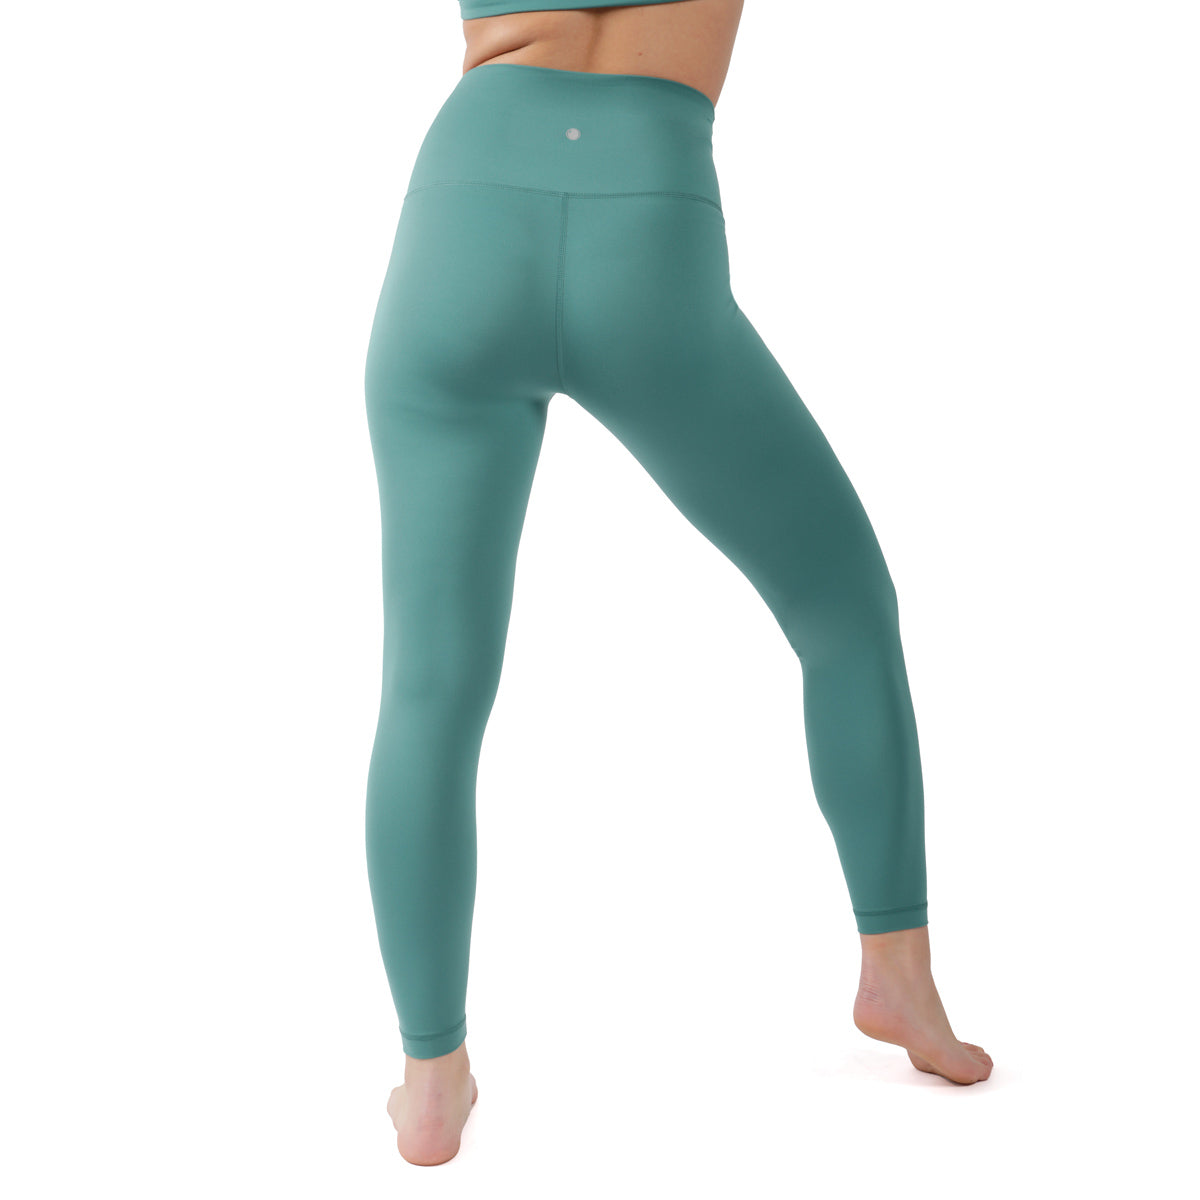 Yogalicious Lux teal green high waisted leggings ankle length pockets –  RHOZIE